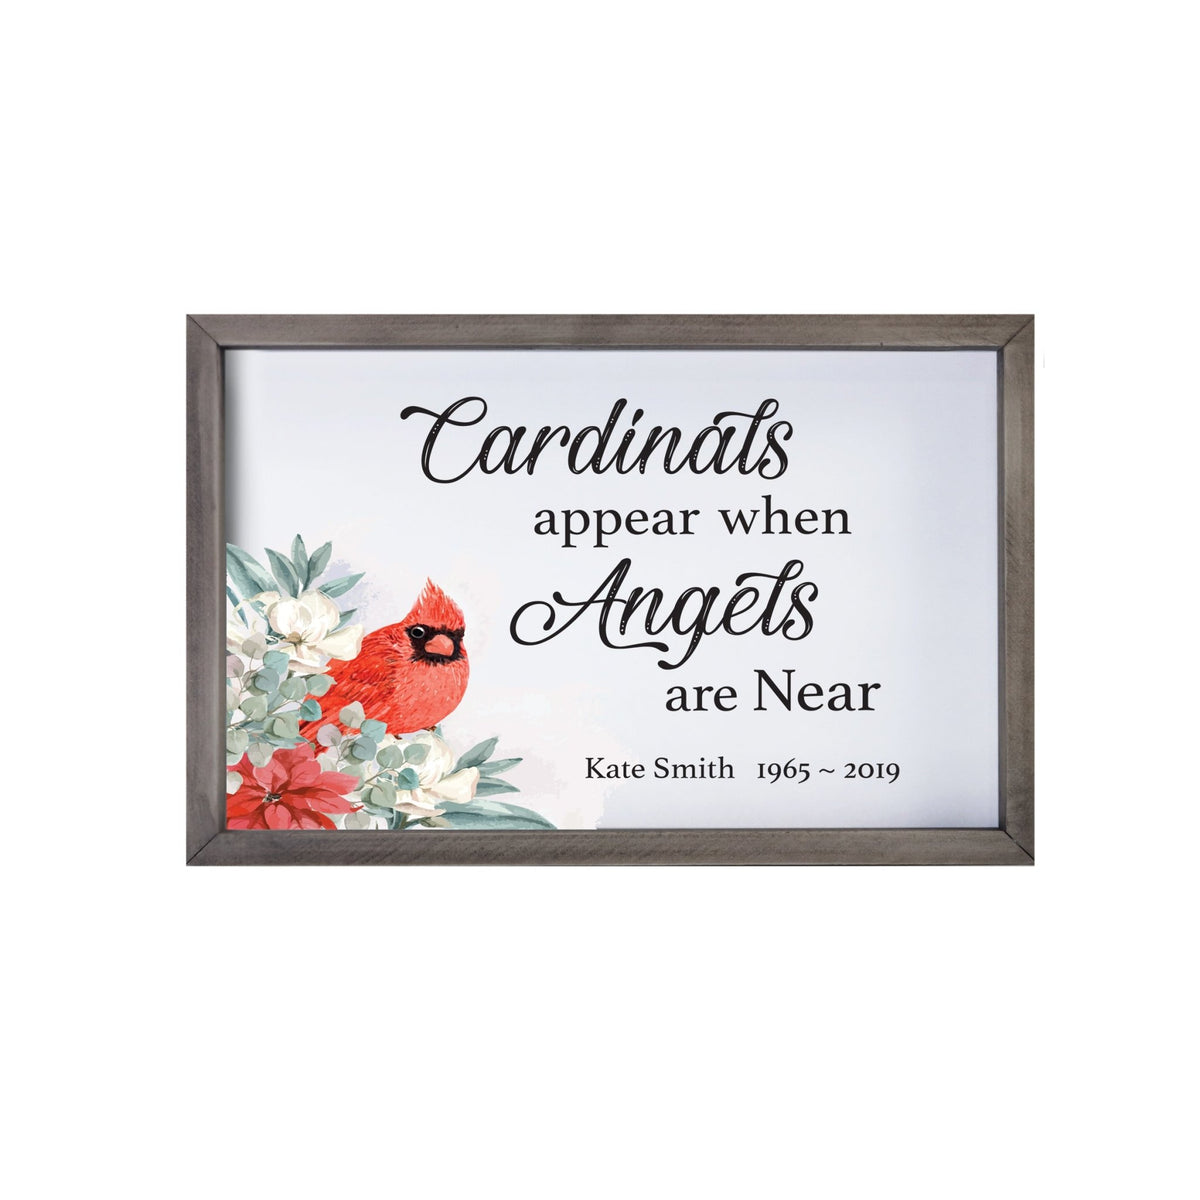 Personalized Merry Christmas Framed Shadow Box - Cardinals Appear - LifeSong Milestones